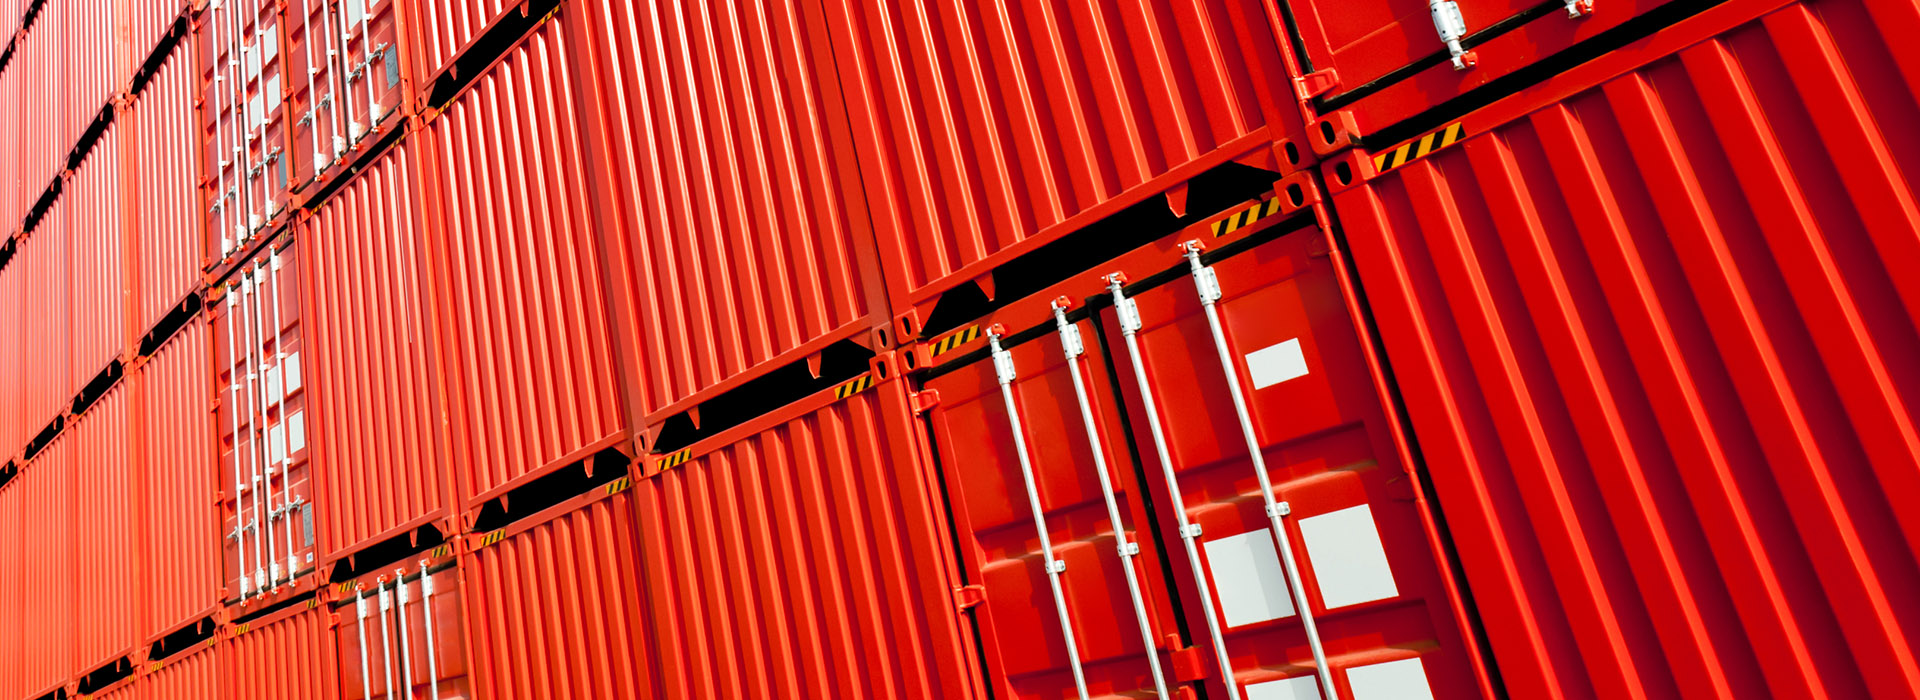 Photo of red shipping containers